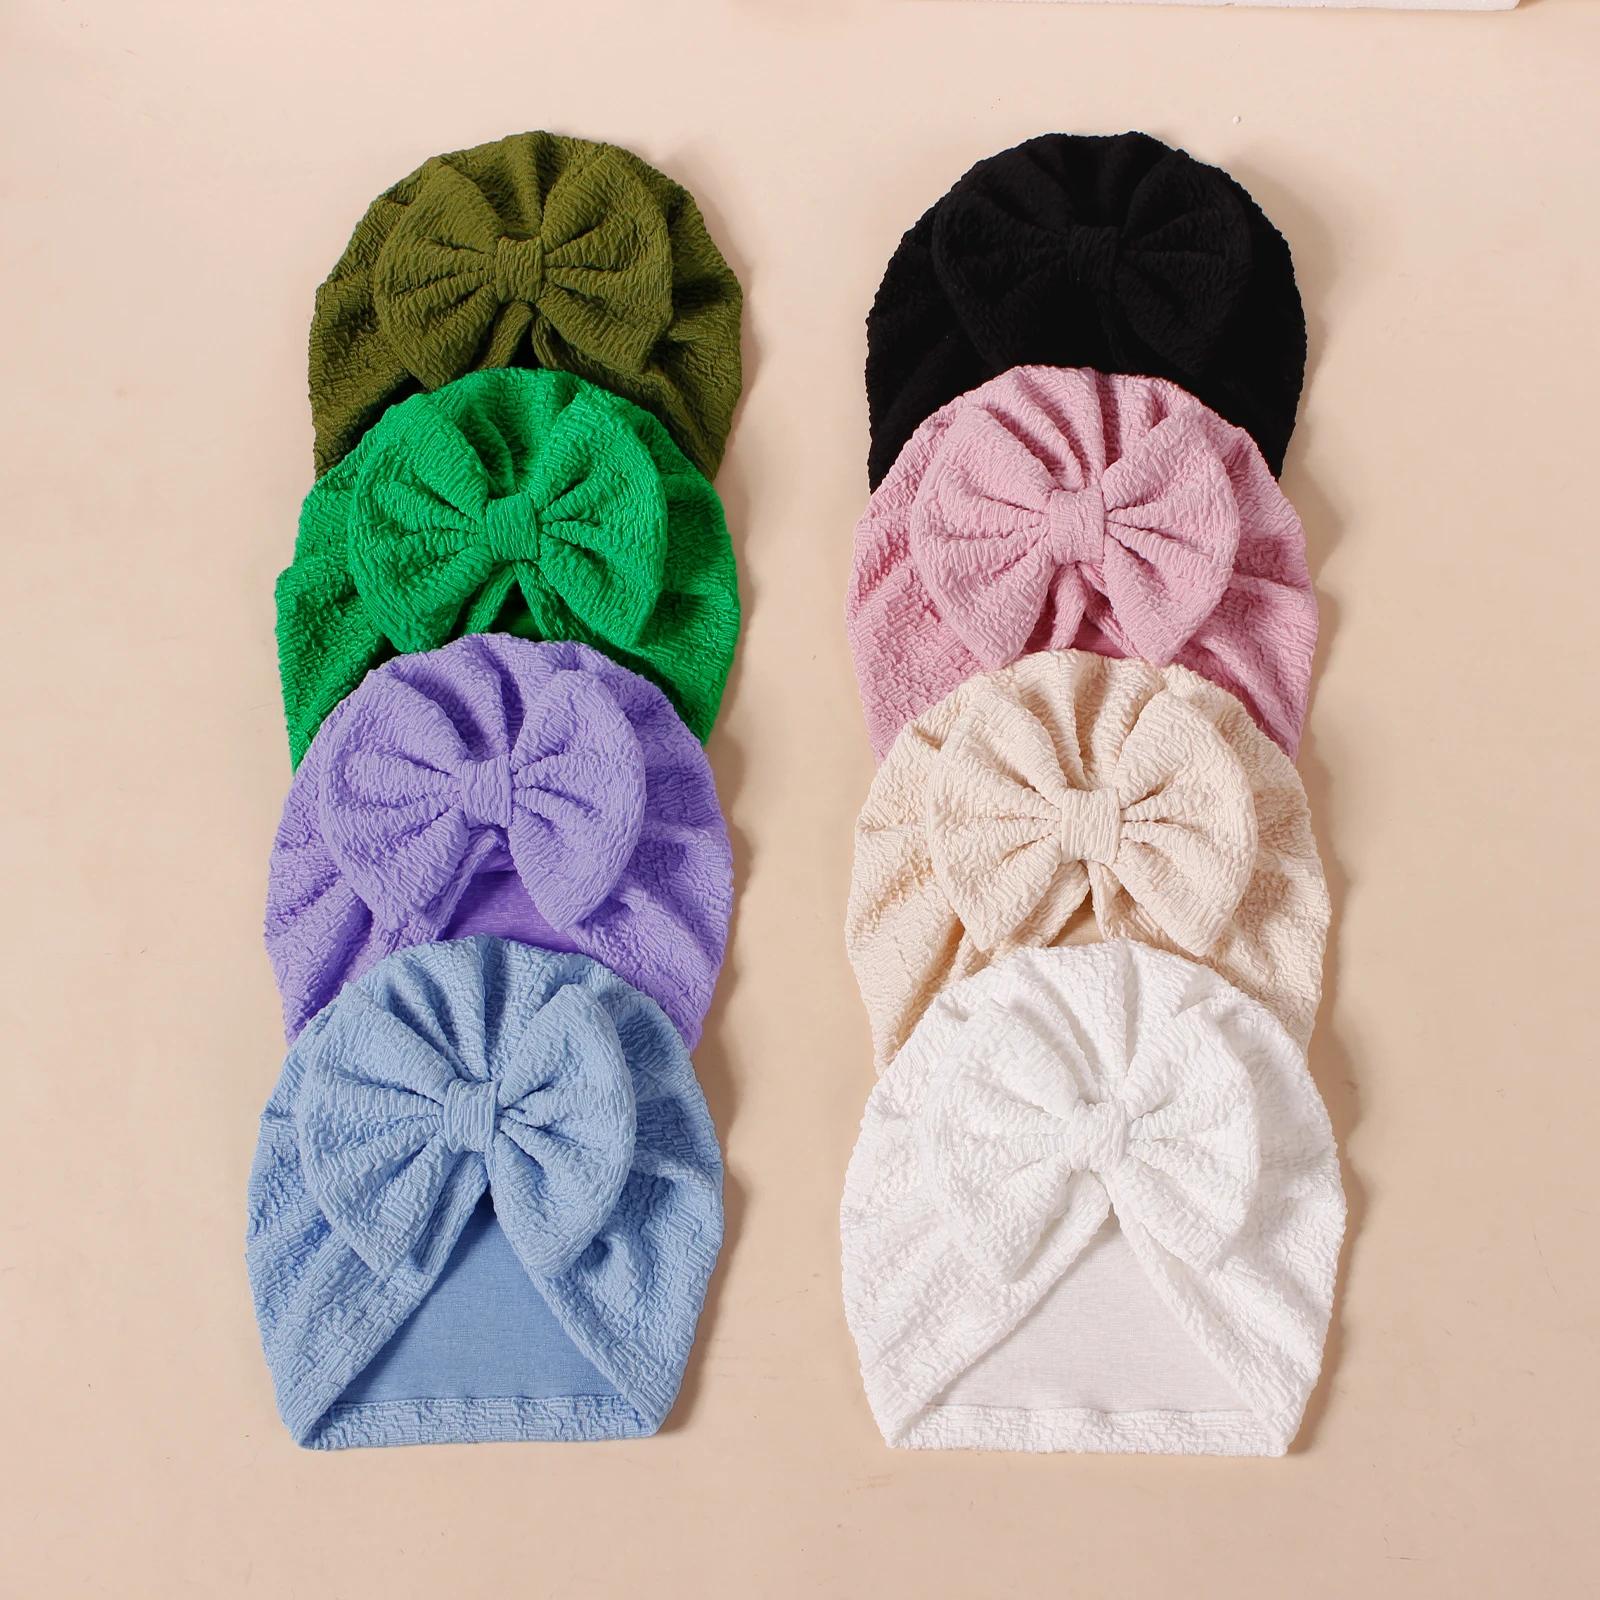 New Soft Cotton Bowknot Turban Babes Solid Color HeadWraps Solid Baby India Hat Kid Girl Infant Beanie Cap Toddler Baby Headwear 67jc newborn baby girls boys infant girl toddler comfy bowknot hospital cap beanie hat easy to wear or take off